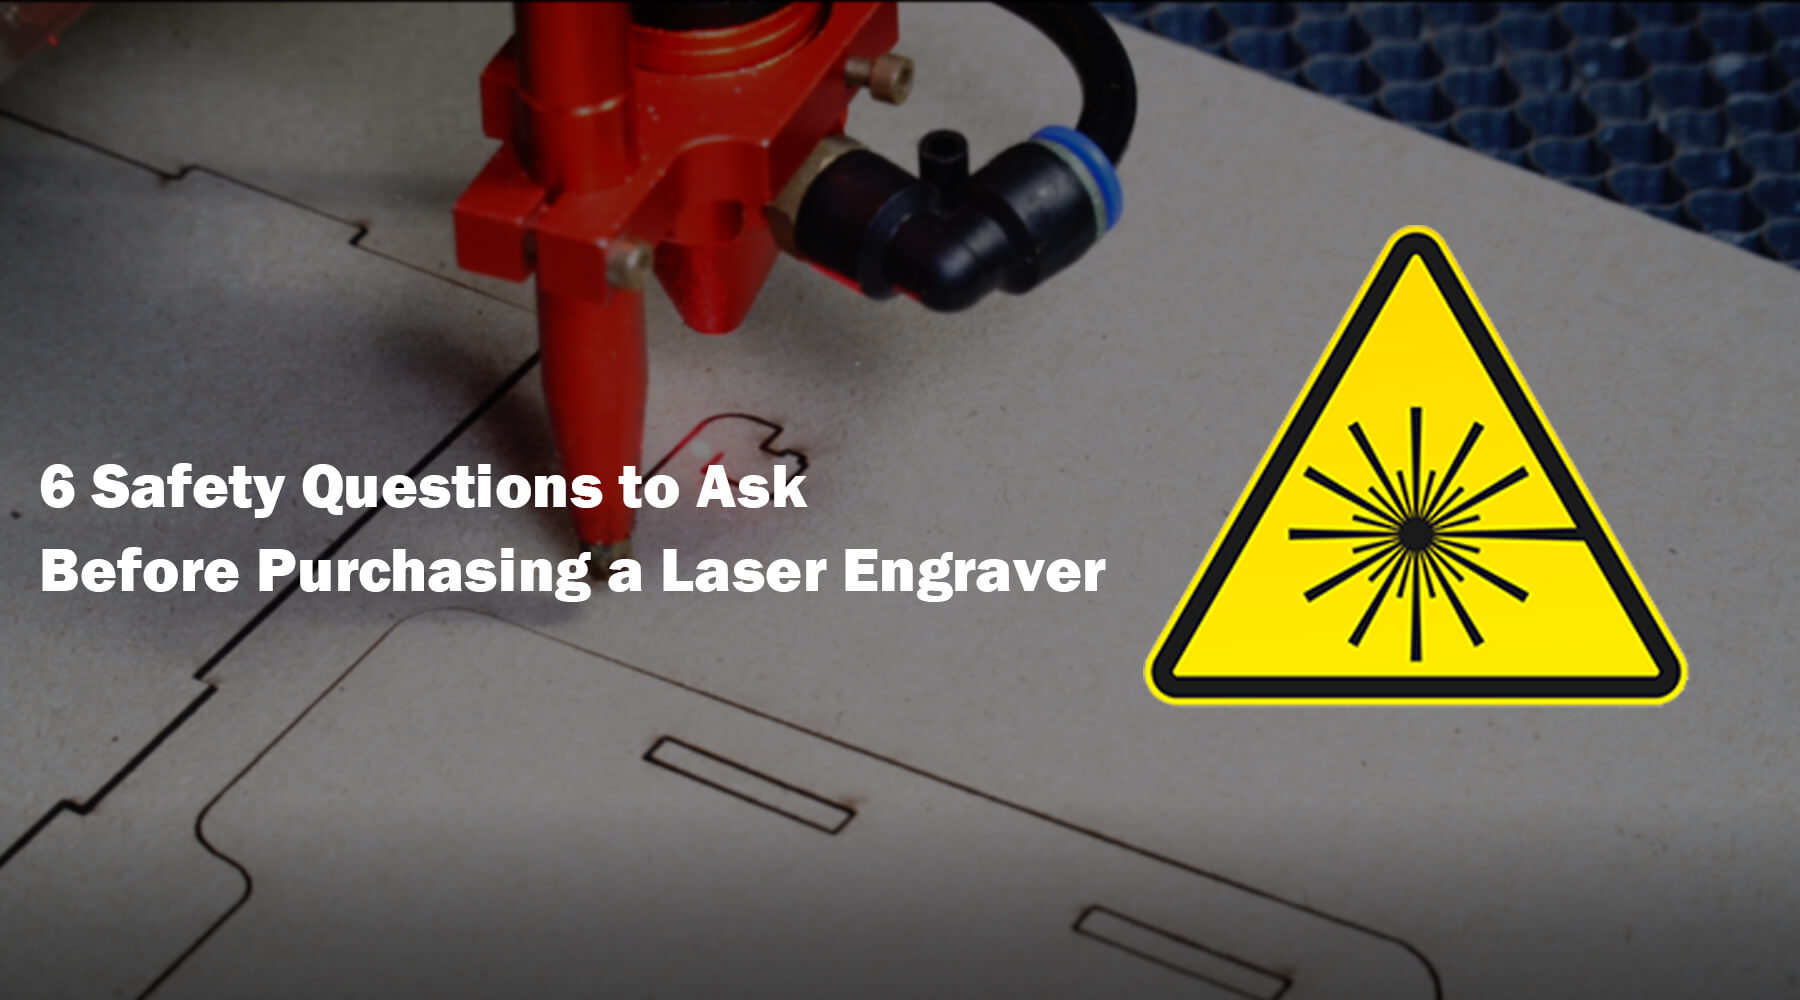 safety questions to ask before purchasing a laser engraver